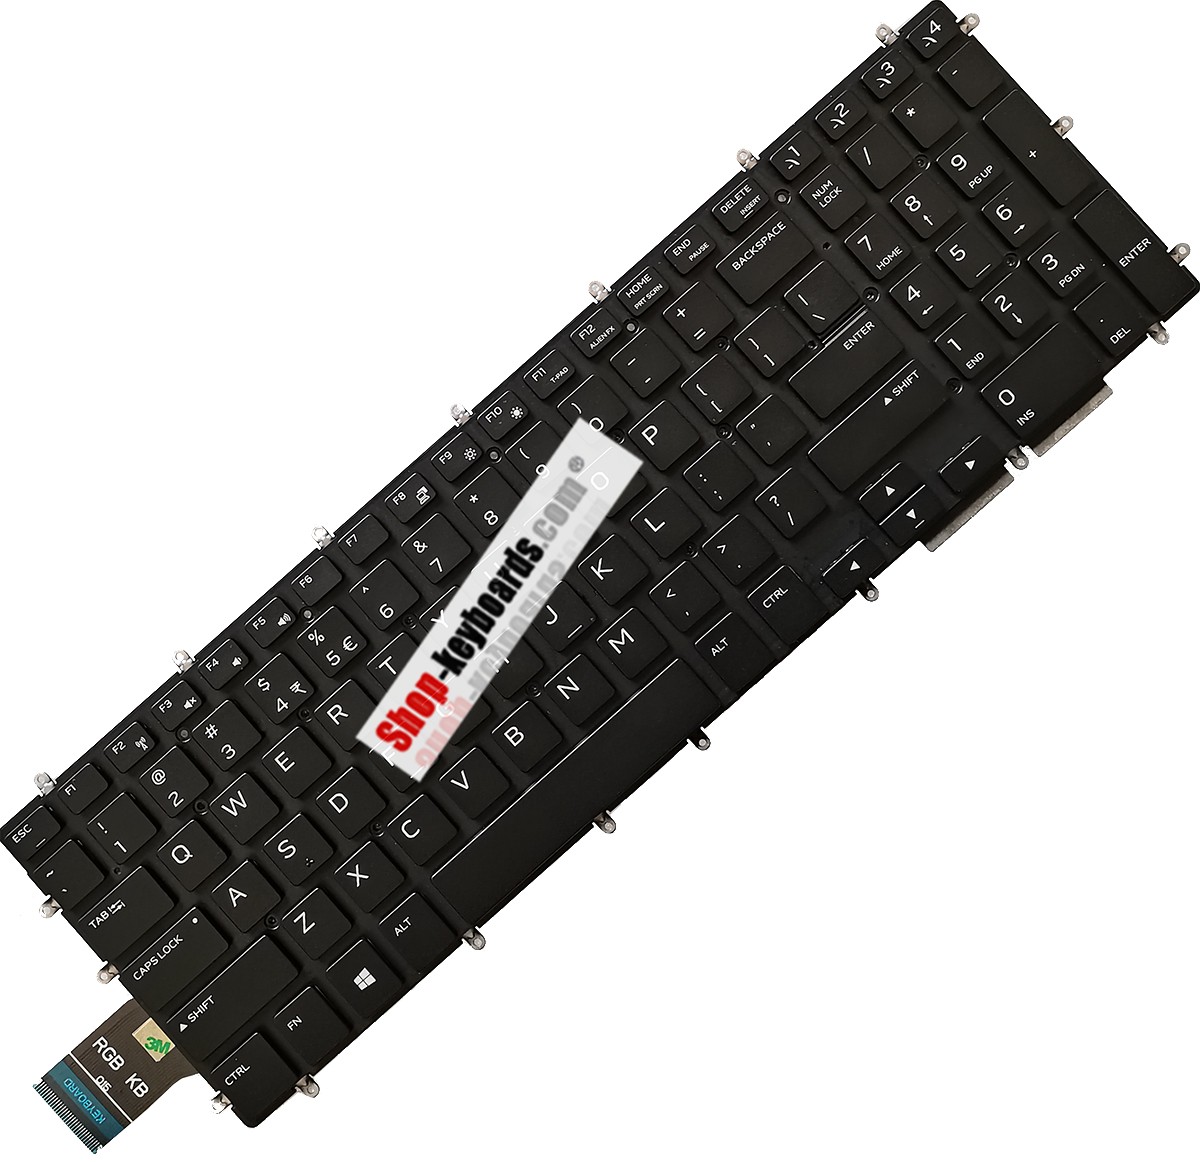 Dell 0KN4-0D1ND13 Keyboard replacement